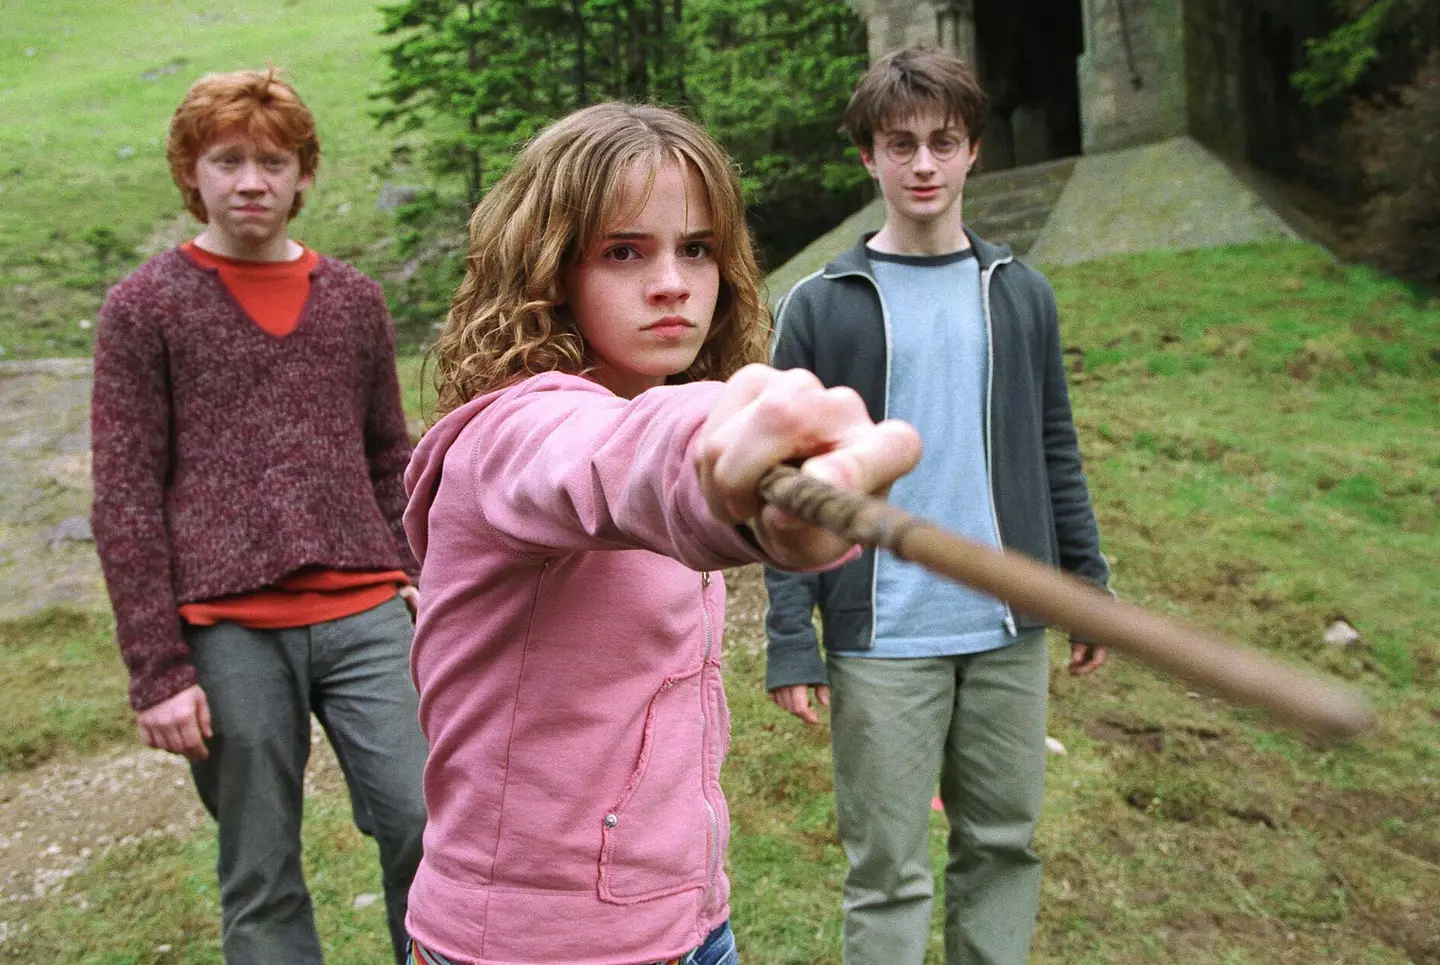 Rupert Grint, from left, Emma Watson and Daniel Radcliffe star in Harry Potter and the Prisoner of Azkaban.